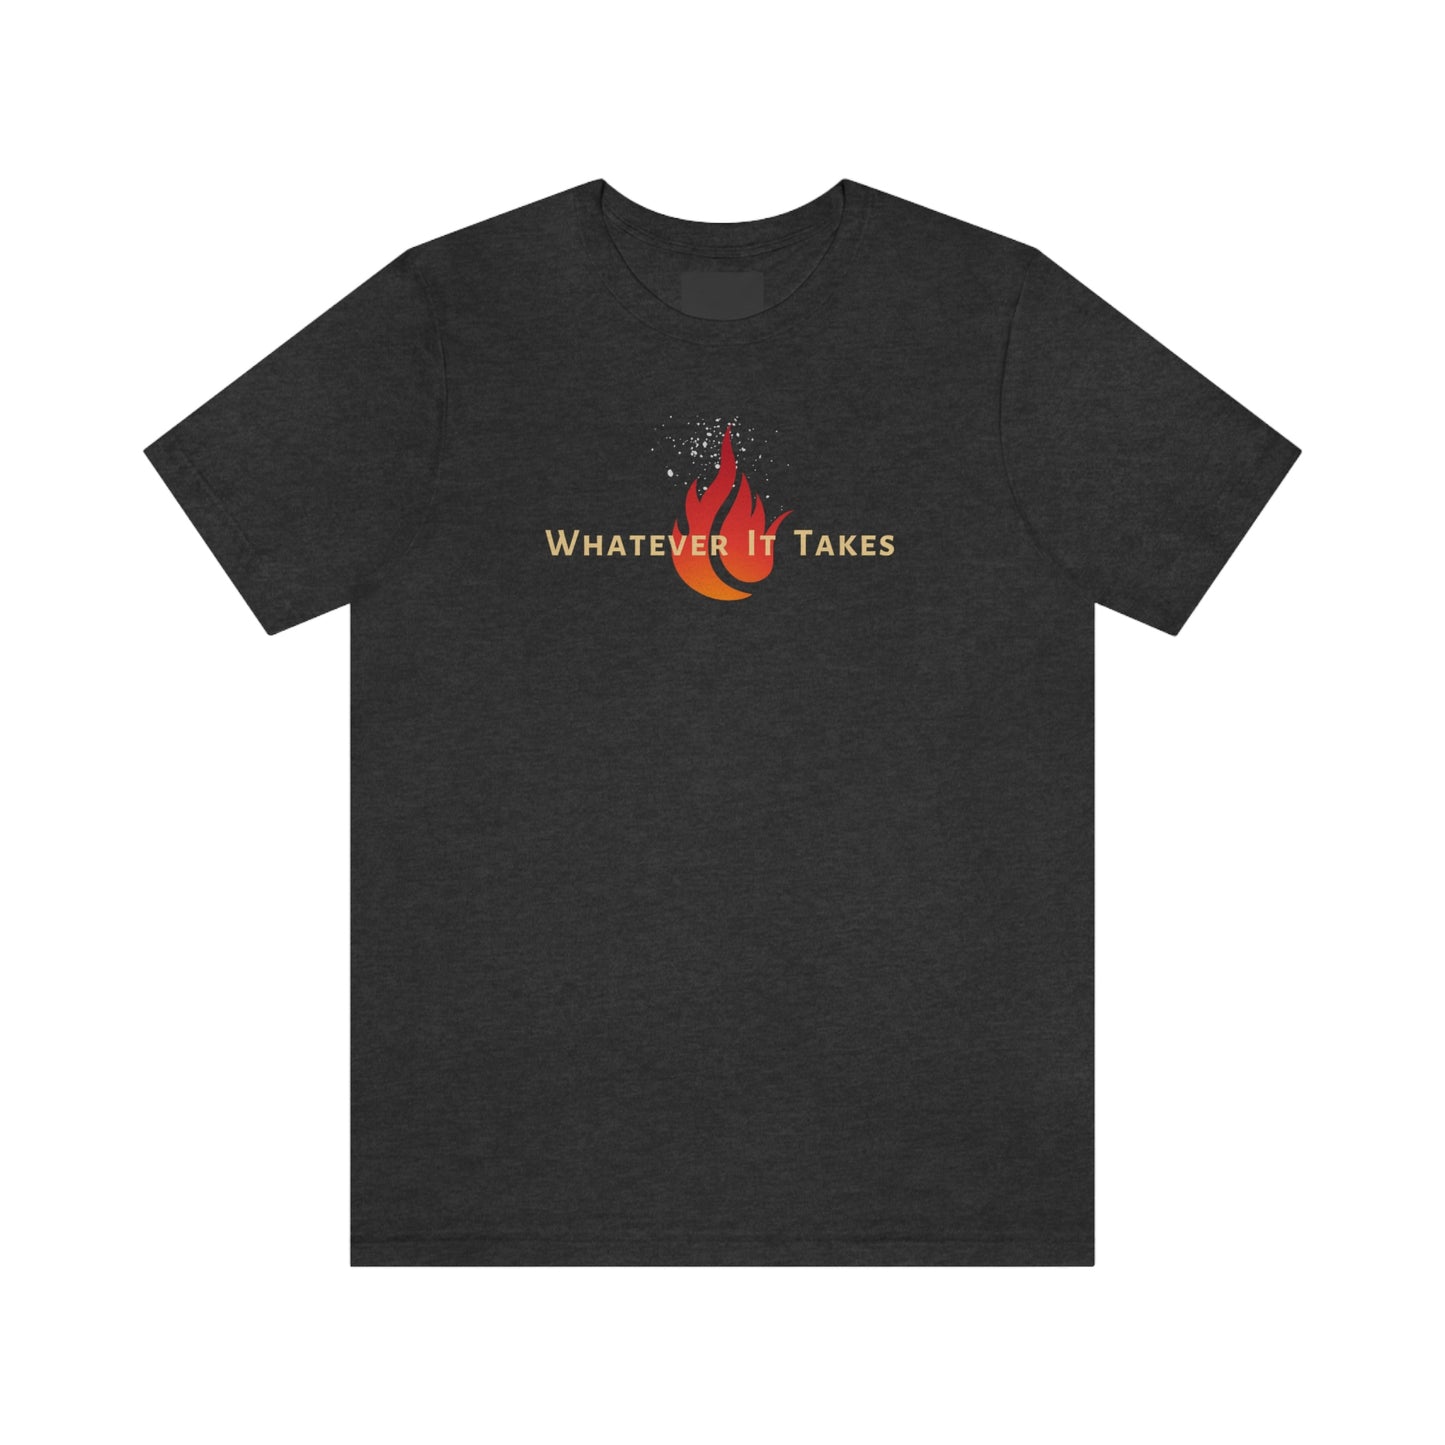 "Whatever It Takes" Short Sleeve Unisex Tee from Celebrate Sobriety Gifts.com